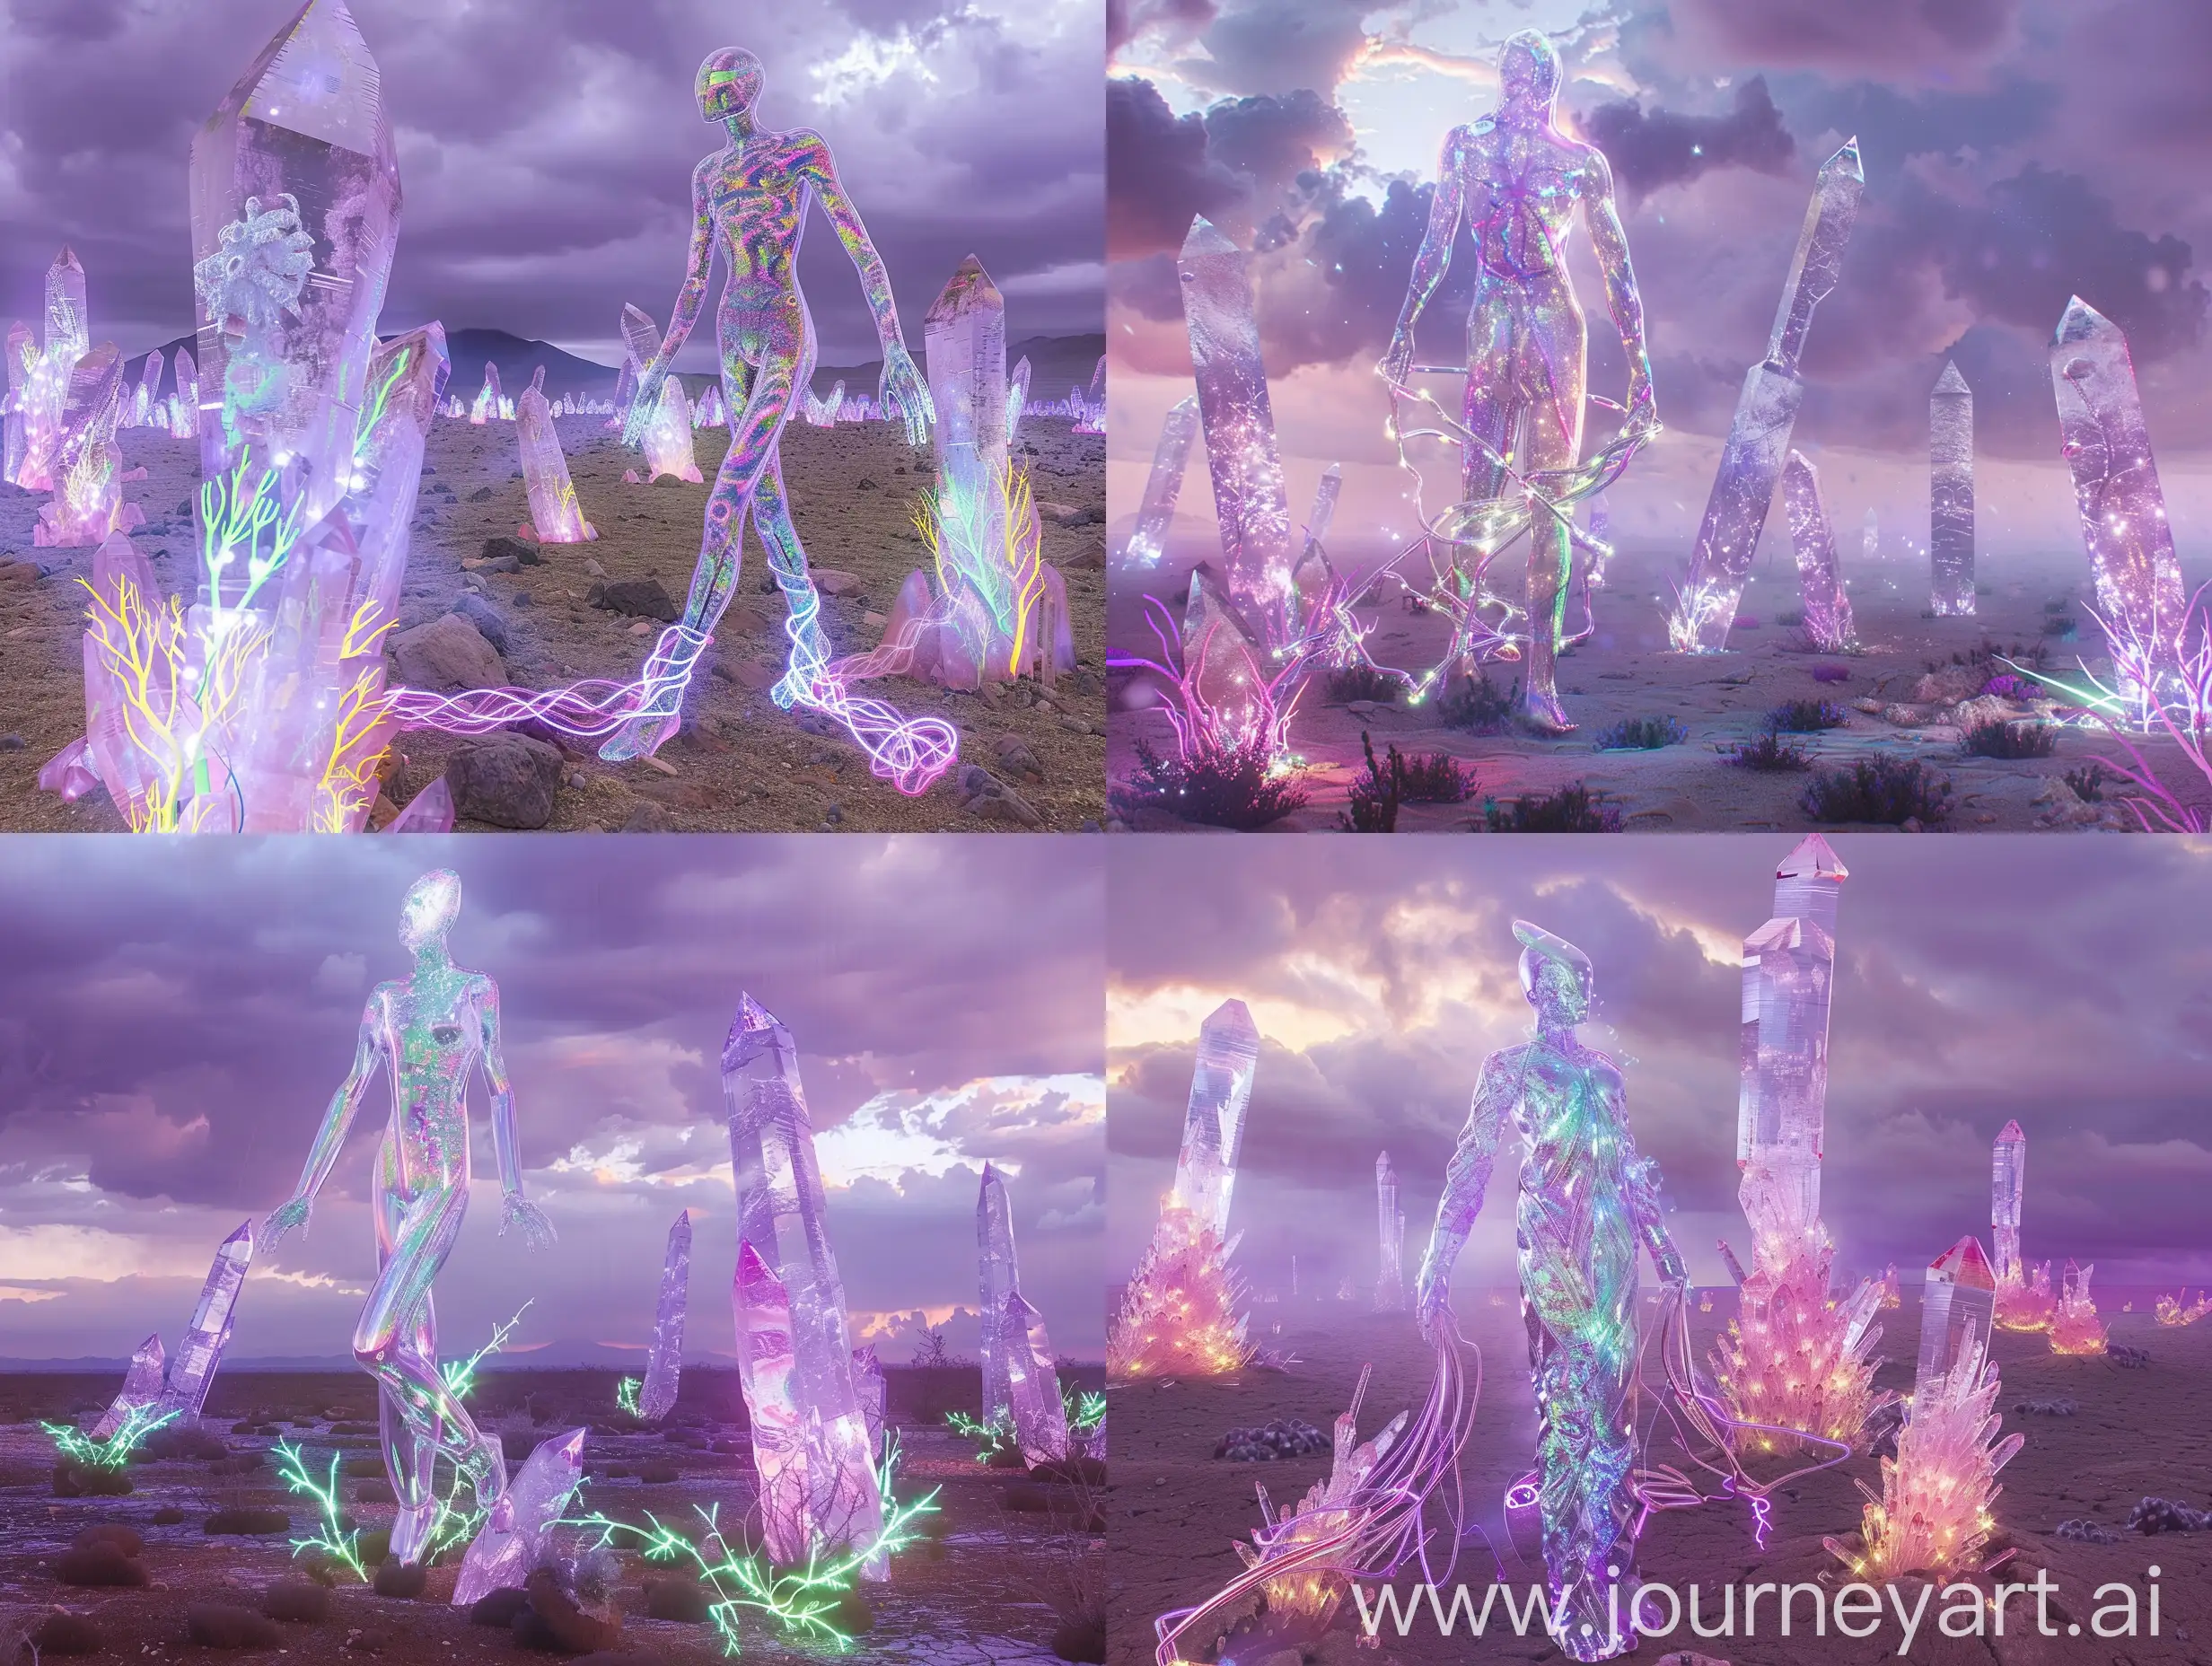 In a stunning surreal alien landscape, jagged crystal formations pierce the cloudy purple sky, casting an eerie glow over the deserted area. The main subject of this surreal couture photograph is a tall, transparent humanoid figure with iridescent skin, decorated with intricate patterns... Its elongated limbs are intertwined with bright, phosphorescent plants that seem to grow from the very ground where they go.. Bathed in soft, ethereal light, the image captures the essence of otherworldly beauty in this mesmerizing digital work of art.... inviting viewers to immerse themselves in its breathtaking atmosphere.